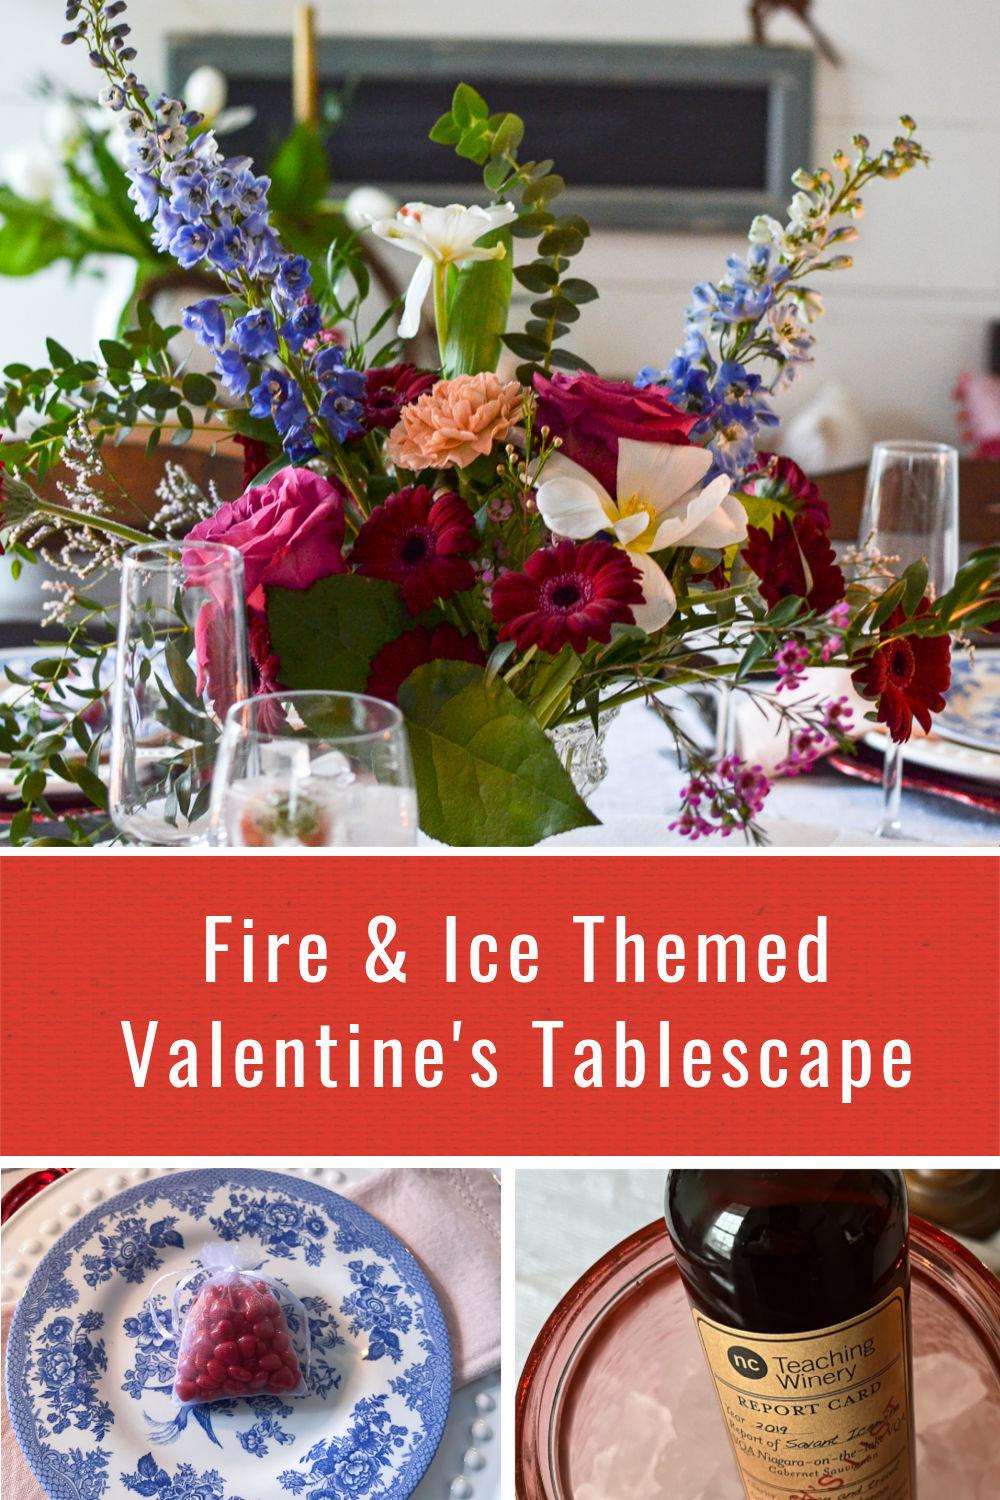 Pinterest imaging depicting a Valentines tablescape